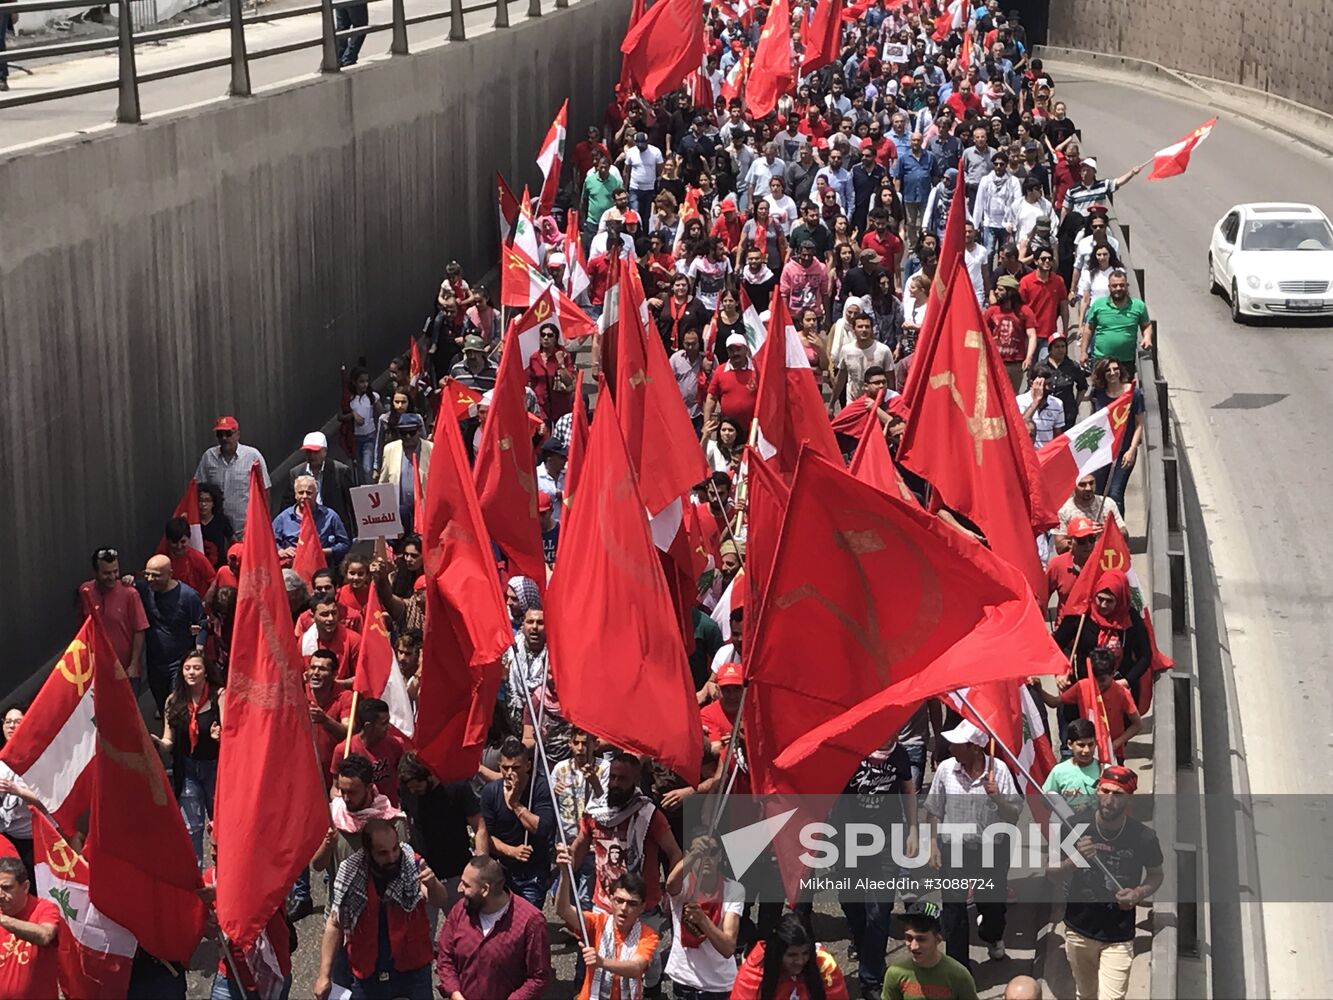 Peaceful rally in Lebanon on Worker Solidarity Day